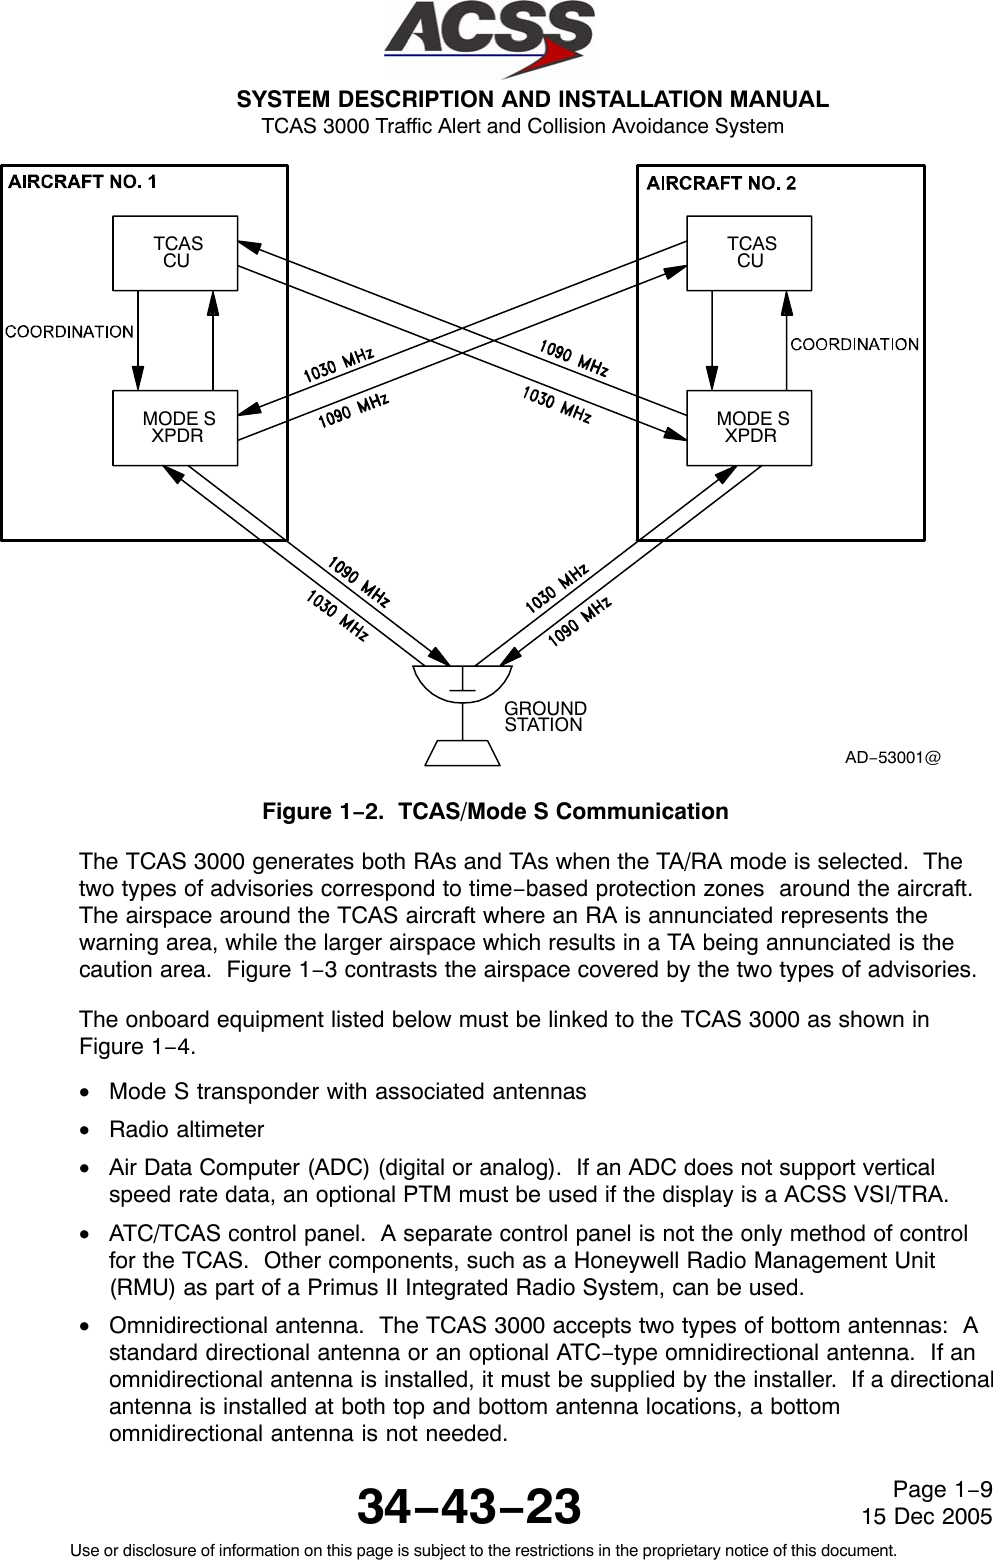 SYSTEM DESCRIPTION AND INSTALLATION MANUAL TCAS 3000 Traffic Alert and Collision Avoidance System34−43−23Use or disclosure of information on this page is subject to the restrictions in the proprietary notice of this document.Page 1−915 Dec 2005GROUNDSTATIONAD−53001@TCASCUMODE SXPDR MODE SXPDRTCASCUFigure 1−2.  TCAS/Mode S CommunicationThe TCAS 3000 generates both RAs and TAs when the TA/RA mode is selected.  Thetwo types of advisories correspond to time−based protection zones  around the aircraft.The airspace around the TCAS aircraft where an RA is annunciated represents thewarning area, while the larger airspace which results in a TA being annunciated is thecaution area.  Figure 1−3 contrasts the airspace covered by the two types of advisories.The onboard equipment listed below must be linked to the TCAS 3000 as shown inFigure 1−4.•Mode S transponder with associated antennas•Radio altimeter•Air Data Computer (ADC) (digital or analog).  If an ADC does not support verticalspeed rate data, an optional PTM must be used if the display is a ACSS VSI/TRA.•ATC/TCAS control panel.  A separate control panel is not the only method of controlfor the TCAS.  Other components, such as a Honeywell Radio Management Unit(RMU) as part of a Primus II Integrated Radio System, can be used.•Omnidirectional antenna.  The TCAS 3000 accepts two types of bottom antennas:  Astandard directional antenna or an optional ATC−type omnidirectional antenna.  If anomnidirectional antenna is installed, it must be supplied by the installer.  If a directionalantenna is installed at both top and bottom antenna locations, a bottomomnidirectional antenna is not needed.